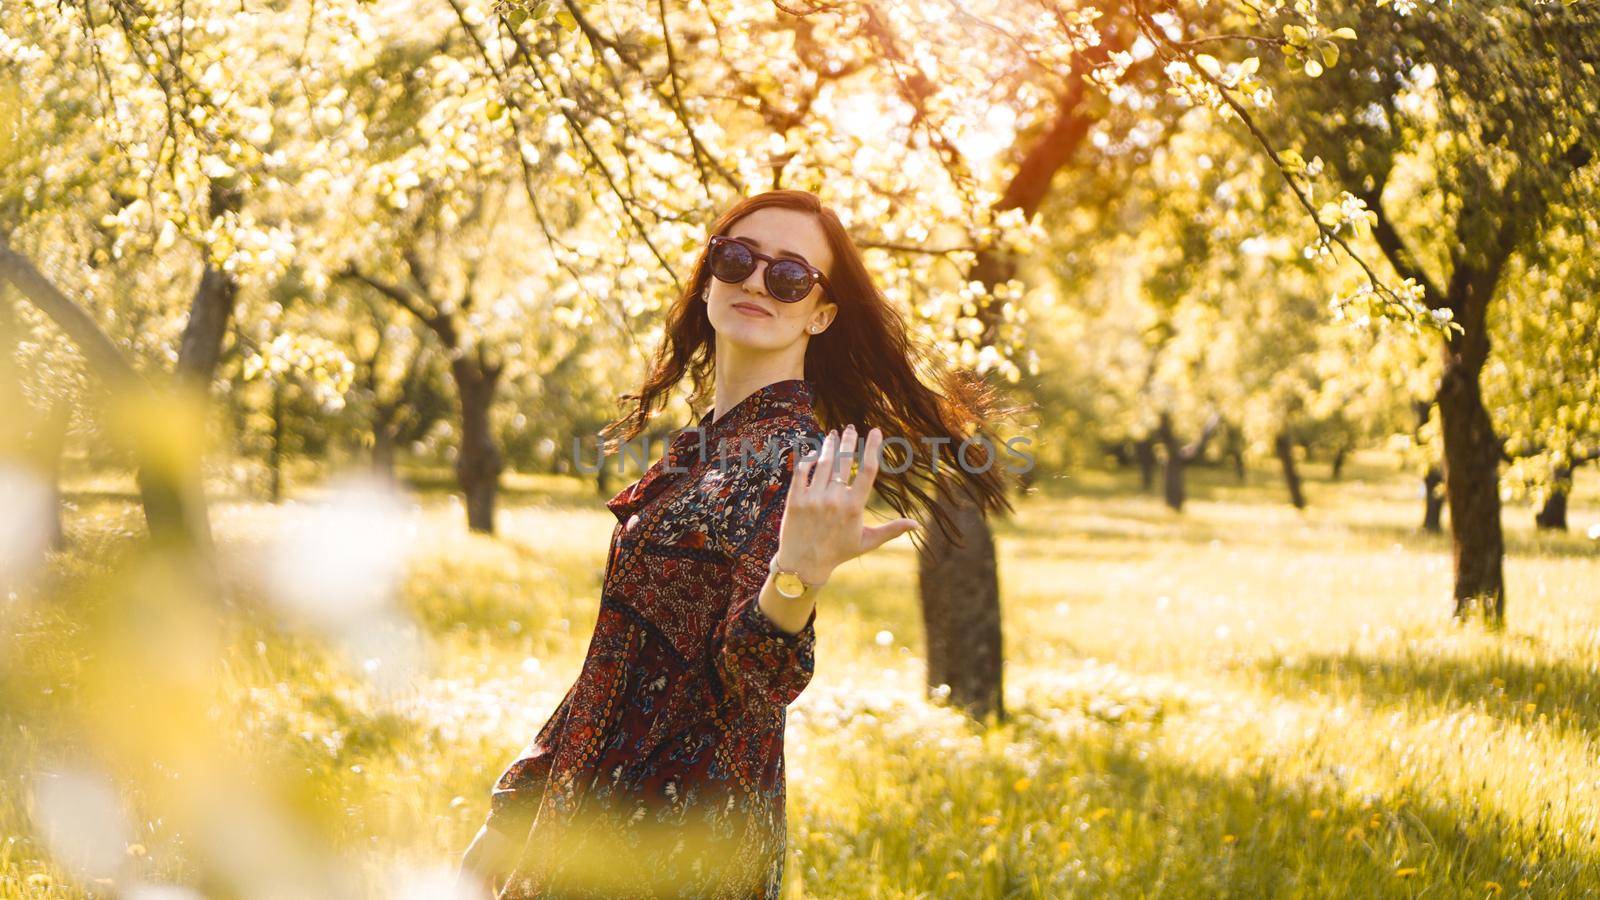 Smiling summer woman with sunglasses by natali_brill